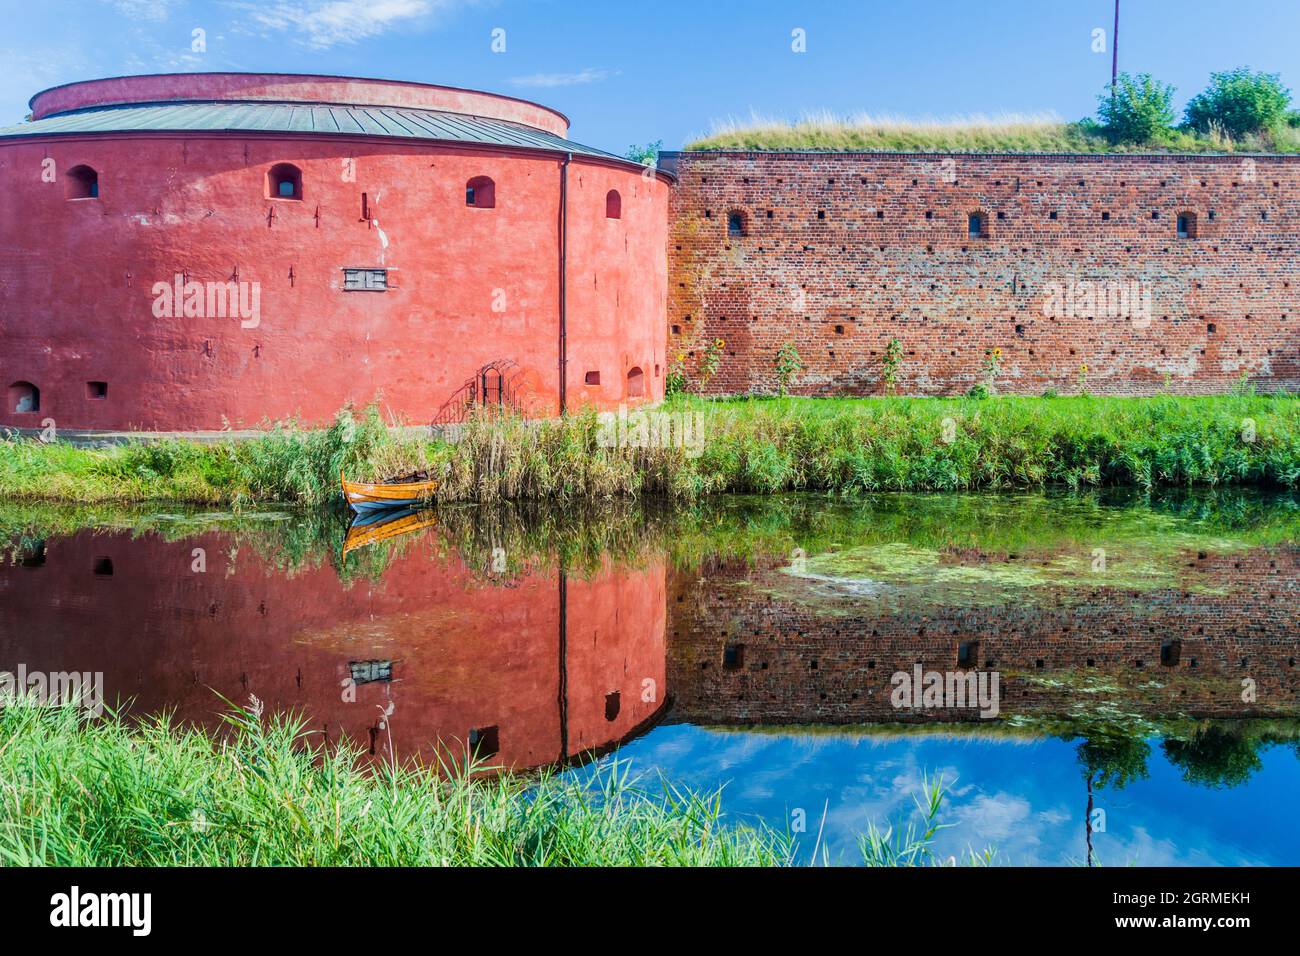 Fortification walls of Malmo Castle reflecting in its moat, Sweden Stock Photo